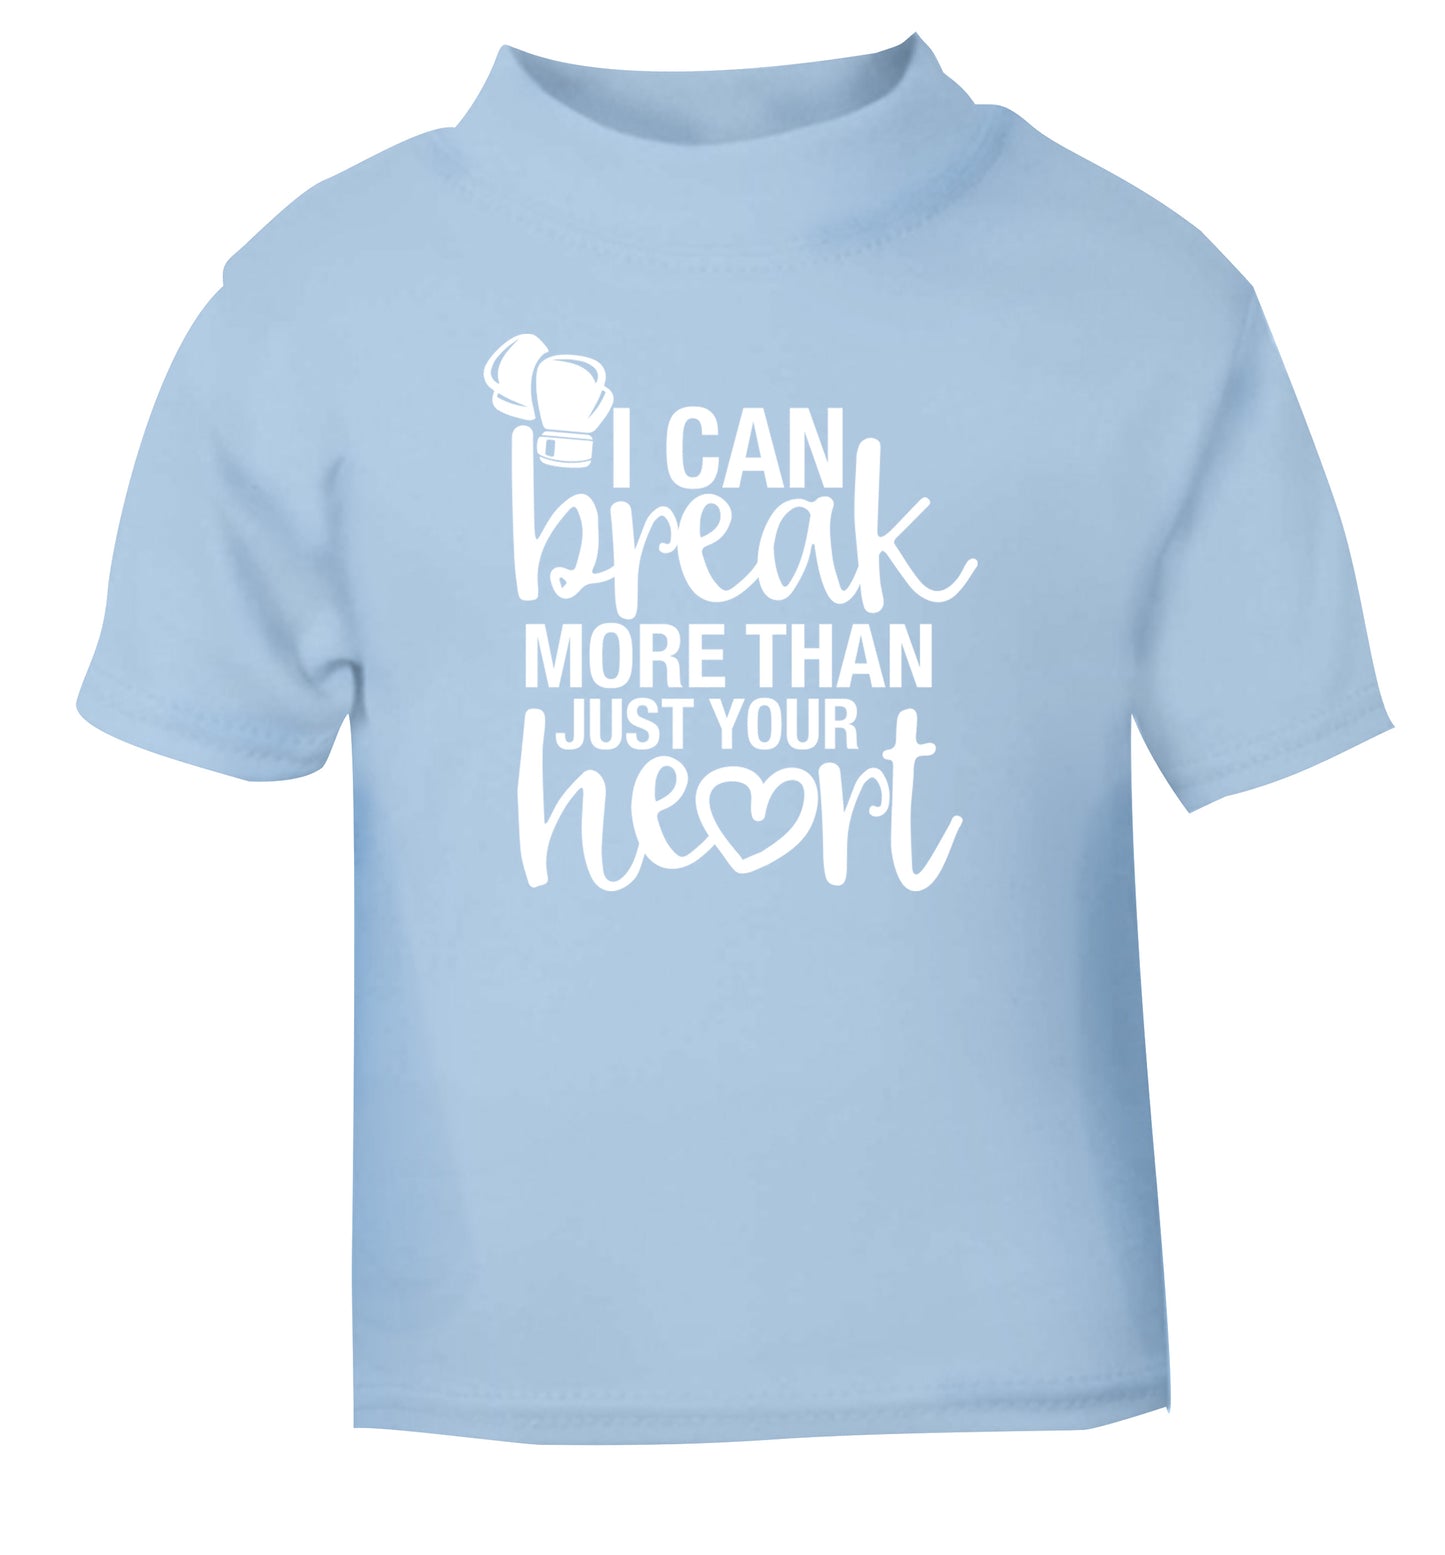 I can break more than just your heart light blue Baby Toddler Tshirt 2 Years